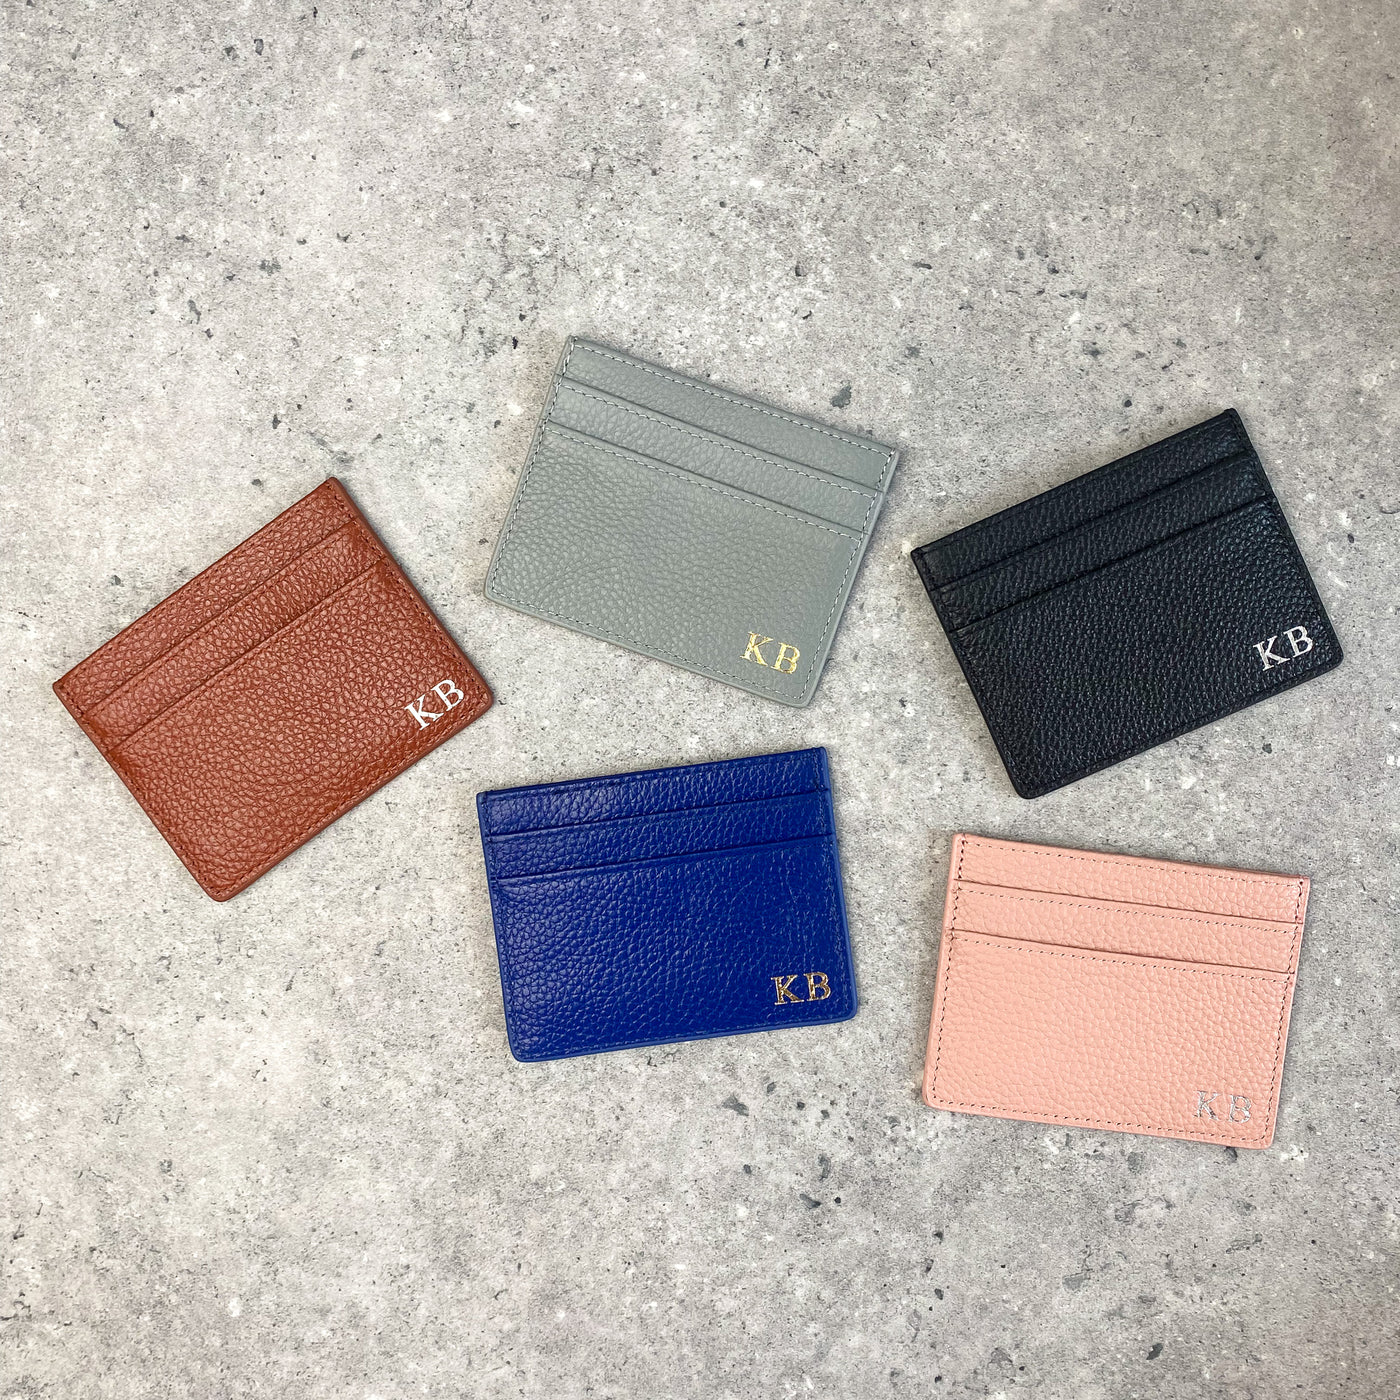 Lapis blue pebble leather card holder embossed with initials. Also in tan, grey, black and nude